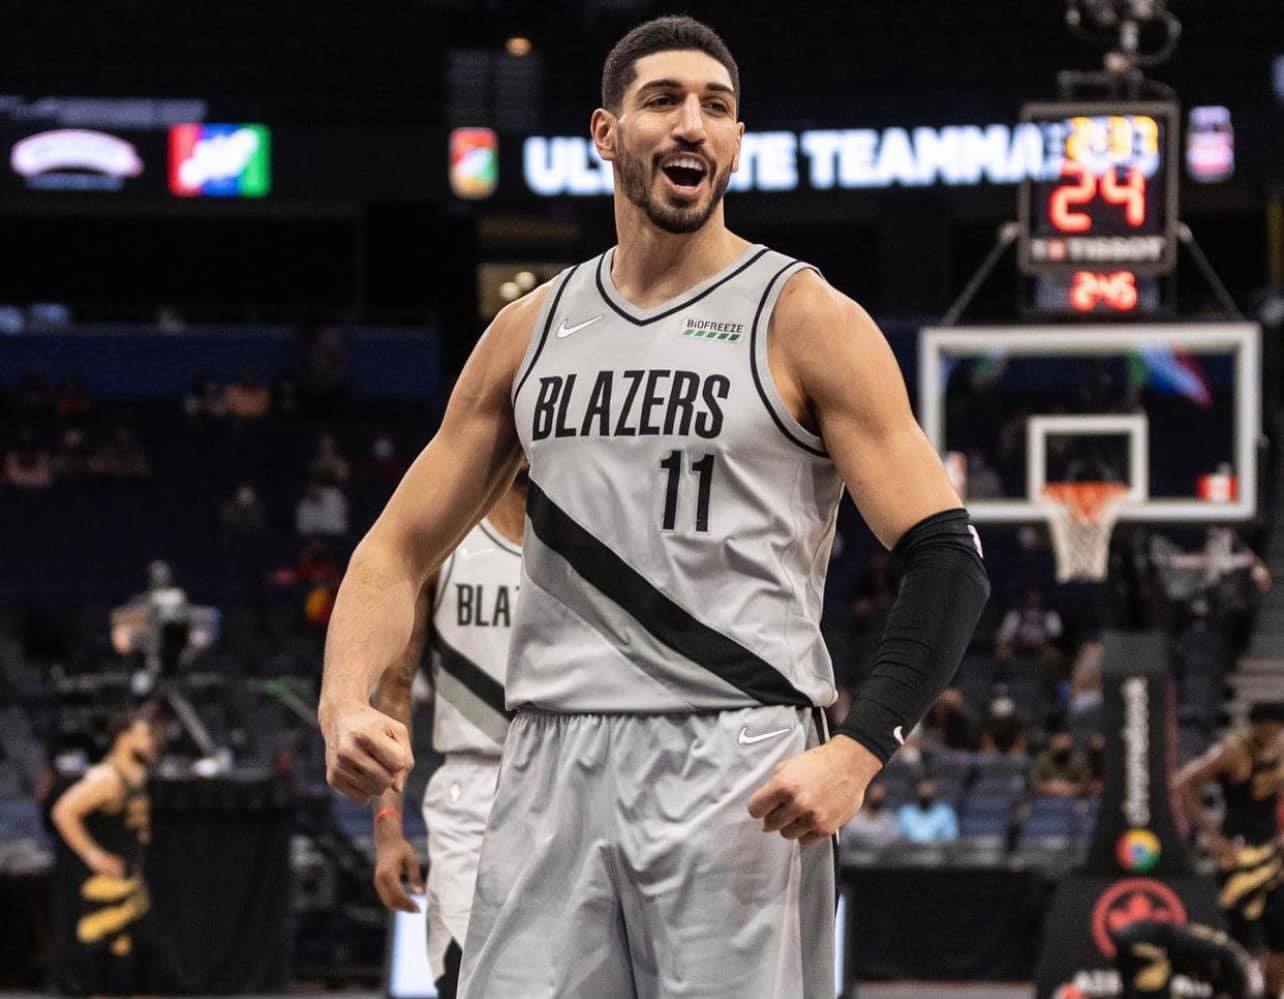 Turkey issued 9 arrest warrants for NBA star Kanter, official records reveal 100